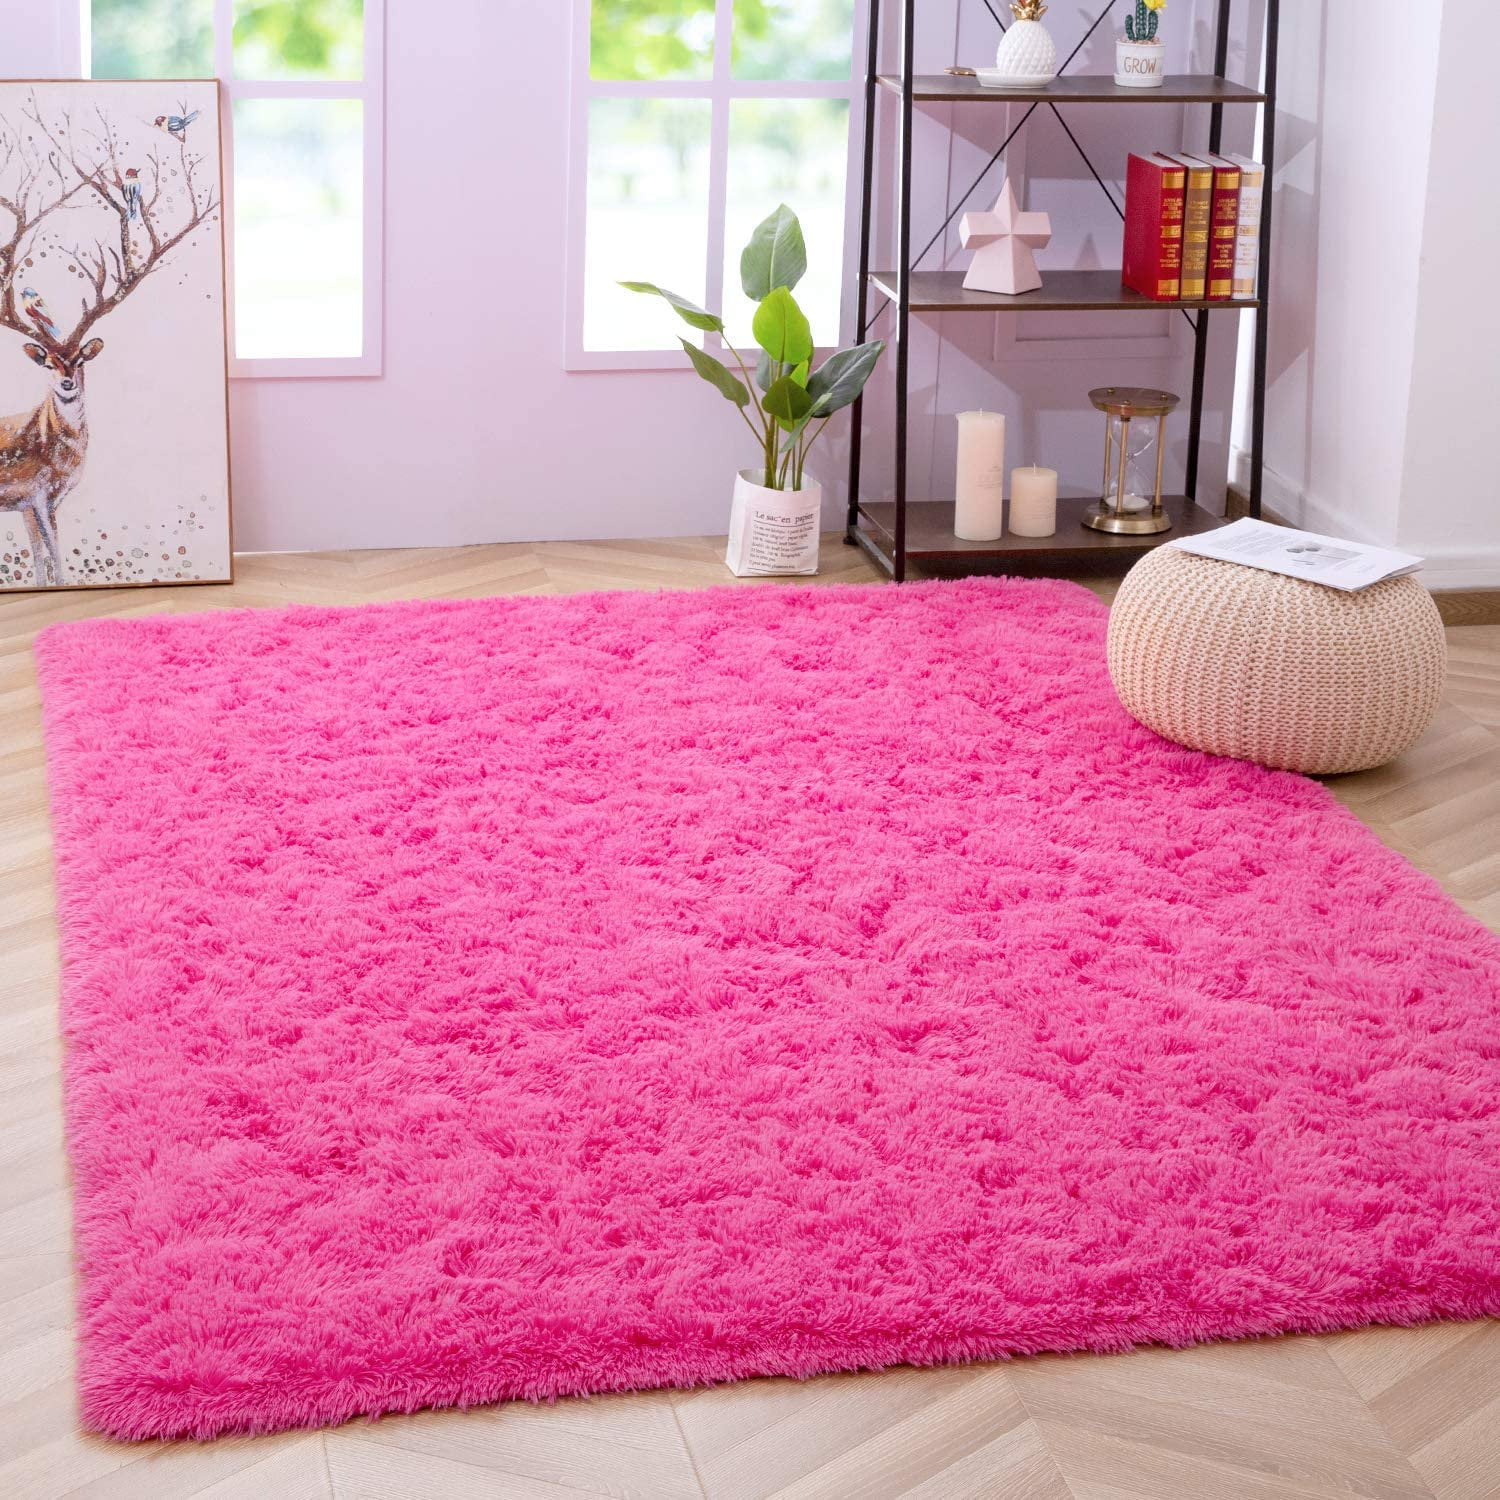 JOYFEEL Soft Fluffy Pink Rugs for Girls Bedroom Living Room, Fuzzy Faux Fur  Area